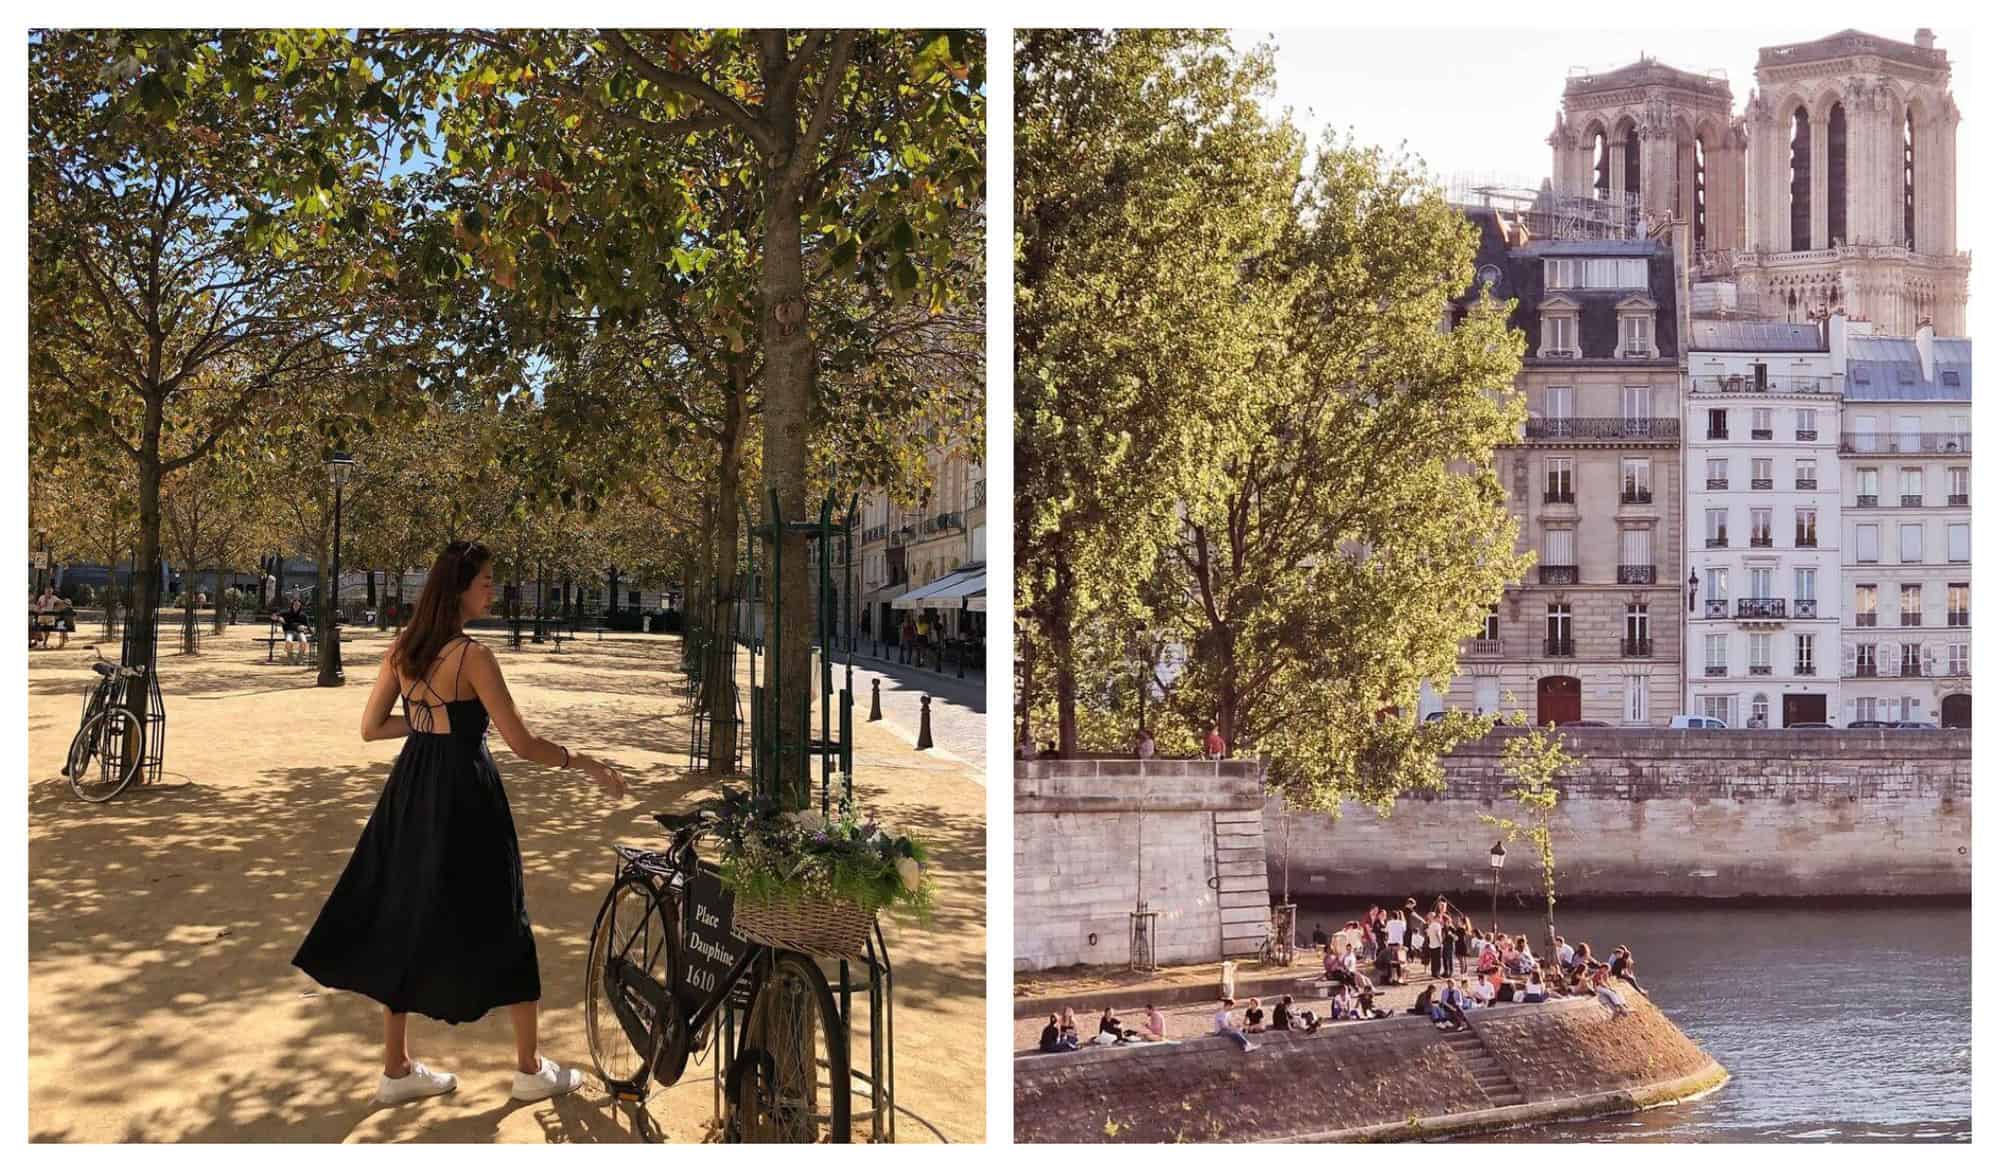 Left: Woman in a black dress looks out at a sunny Place Dauphine. Right: A crowd of friends are sat by the Seine in the sun.